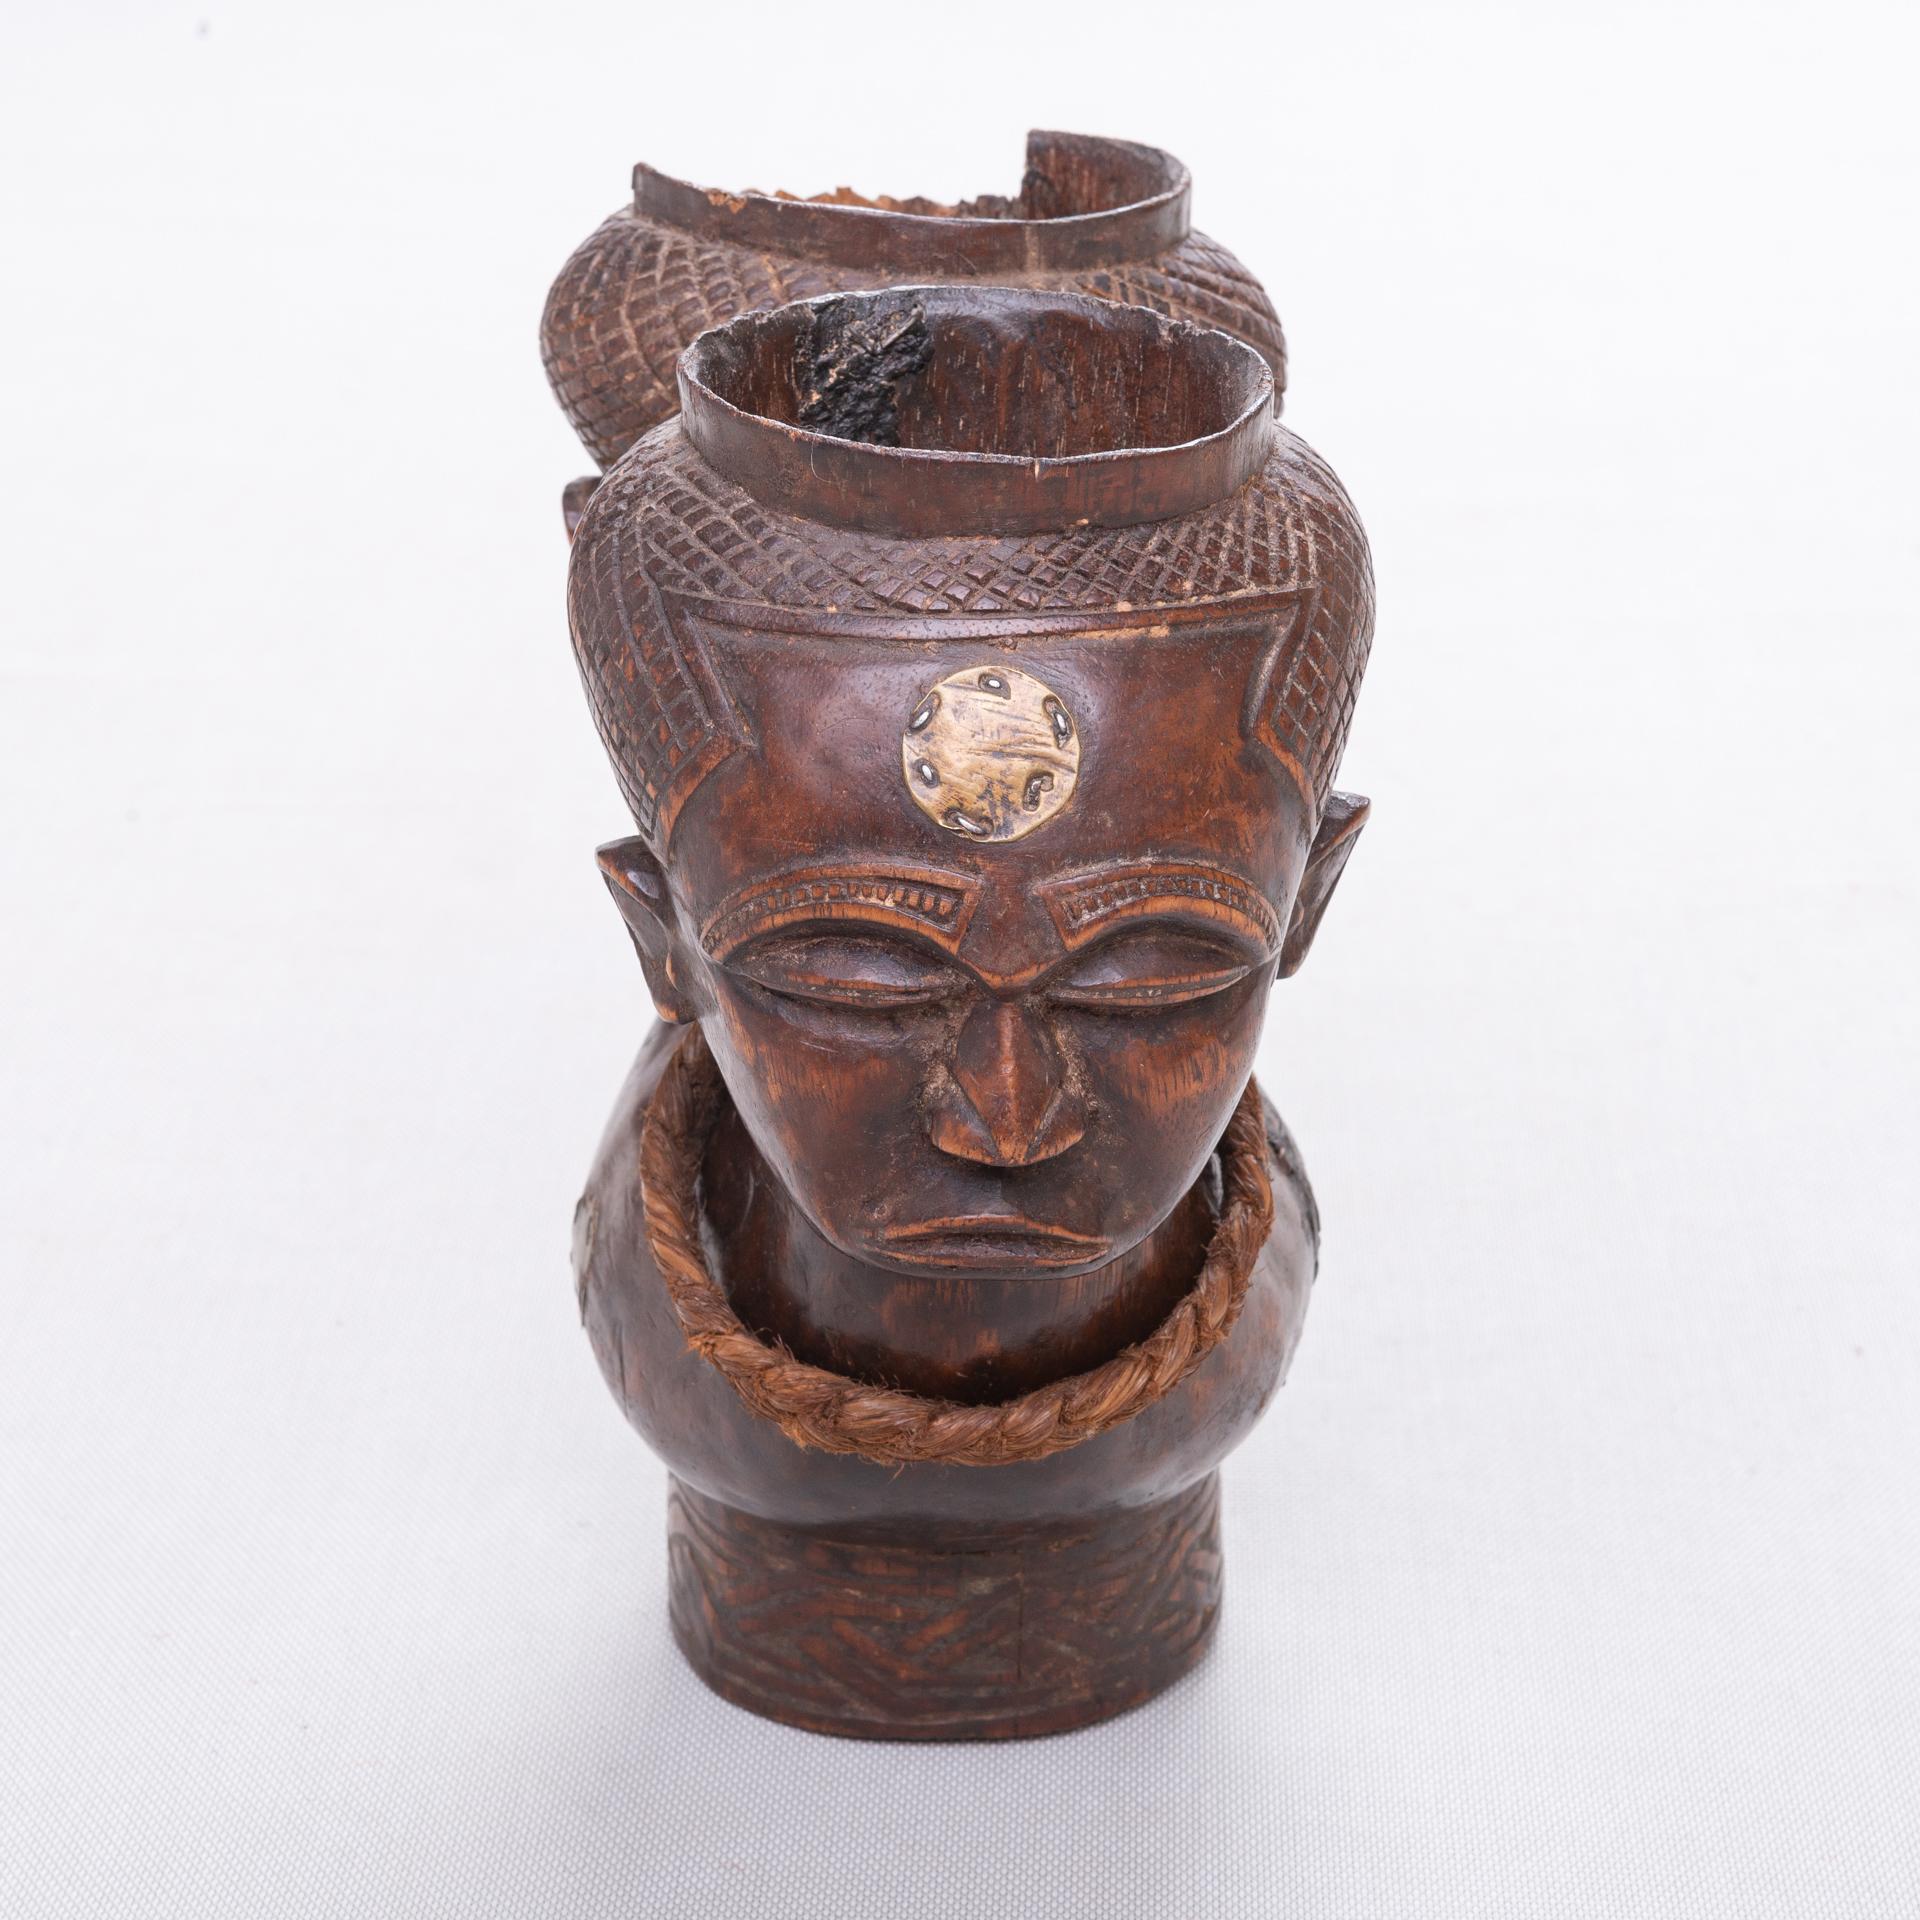 Other Old African Cup With Heads For Sale